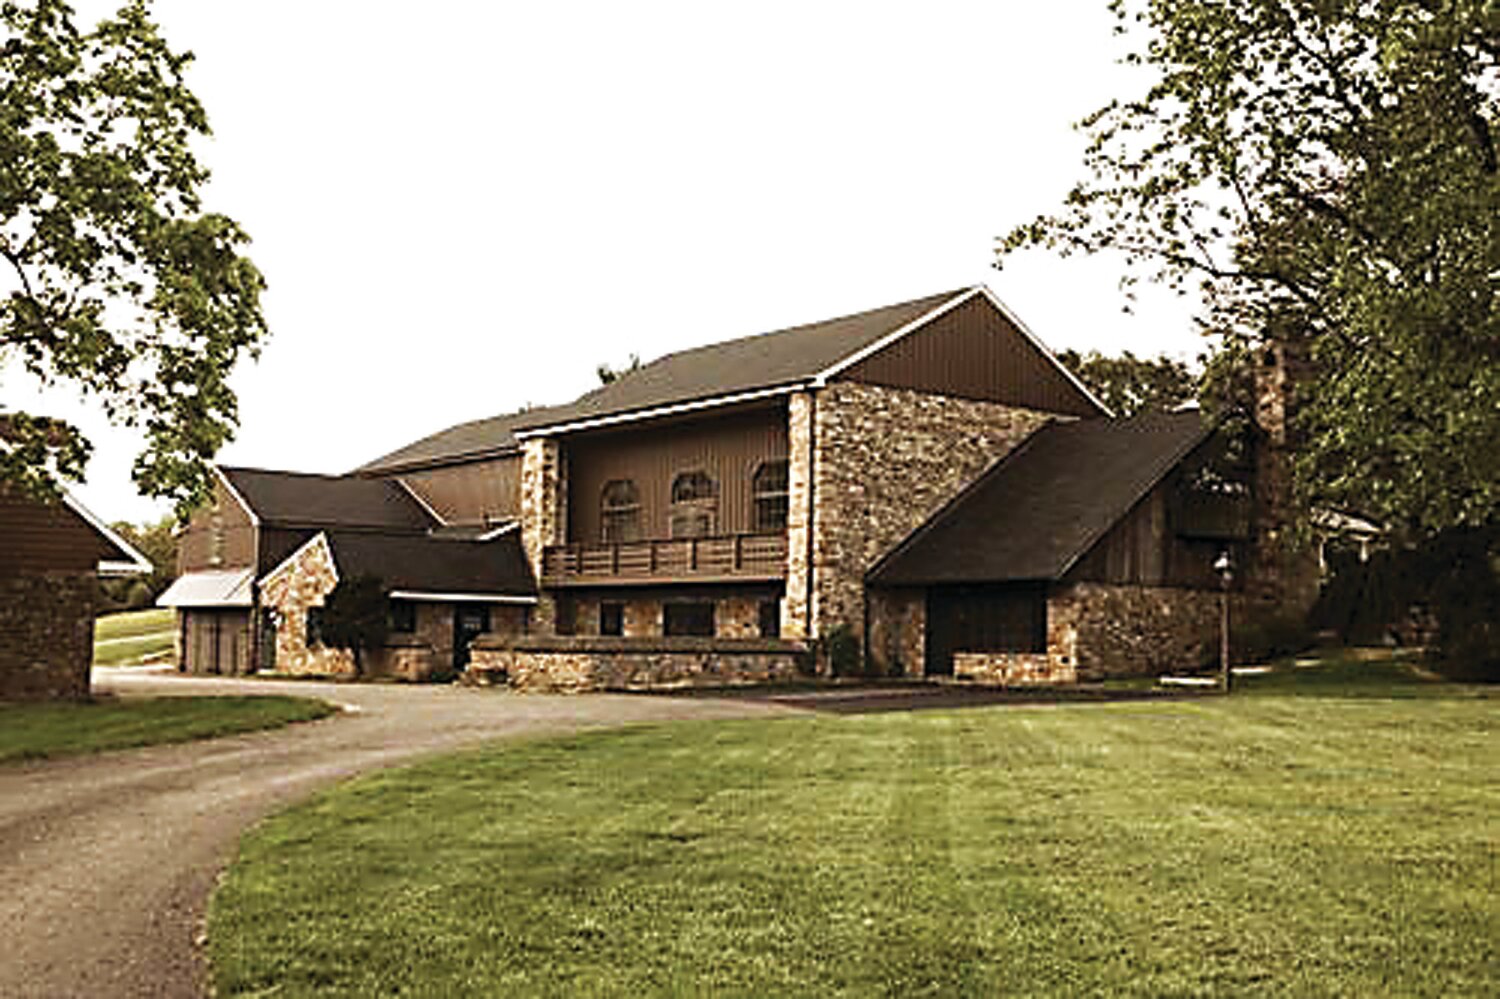 The barn at the Inn at Fox Briar Farm will host the Bucks County Chapter of the Board of Associates of Fox Chase Cancer Center’s fine art exhibit to benefit “Never Smokers Lung Cancer” at Fox Chase Cancer Center.